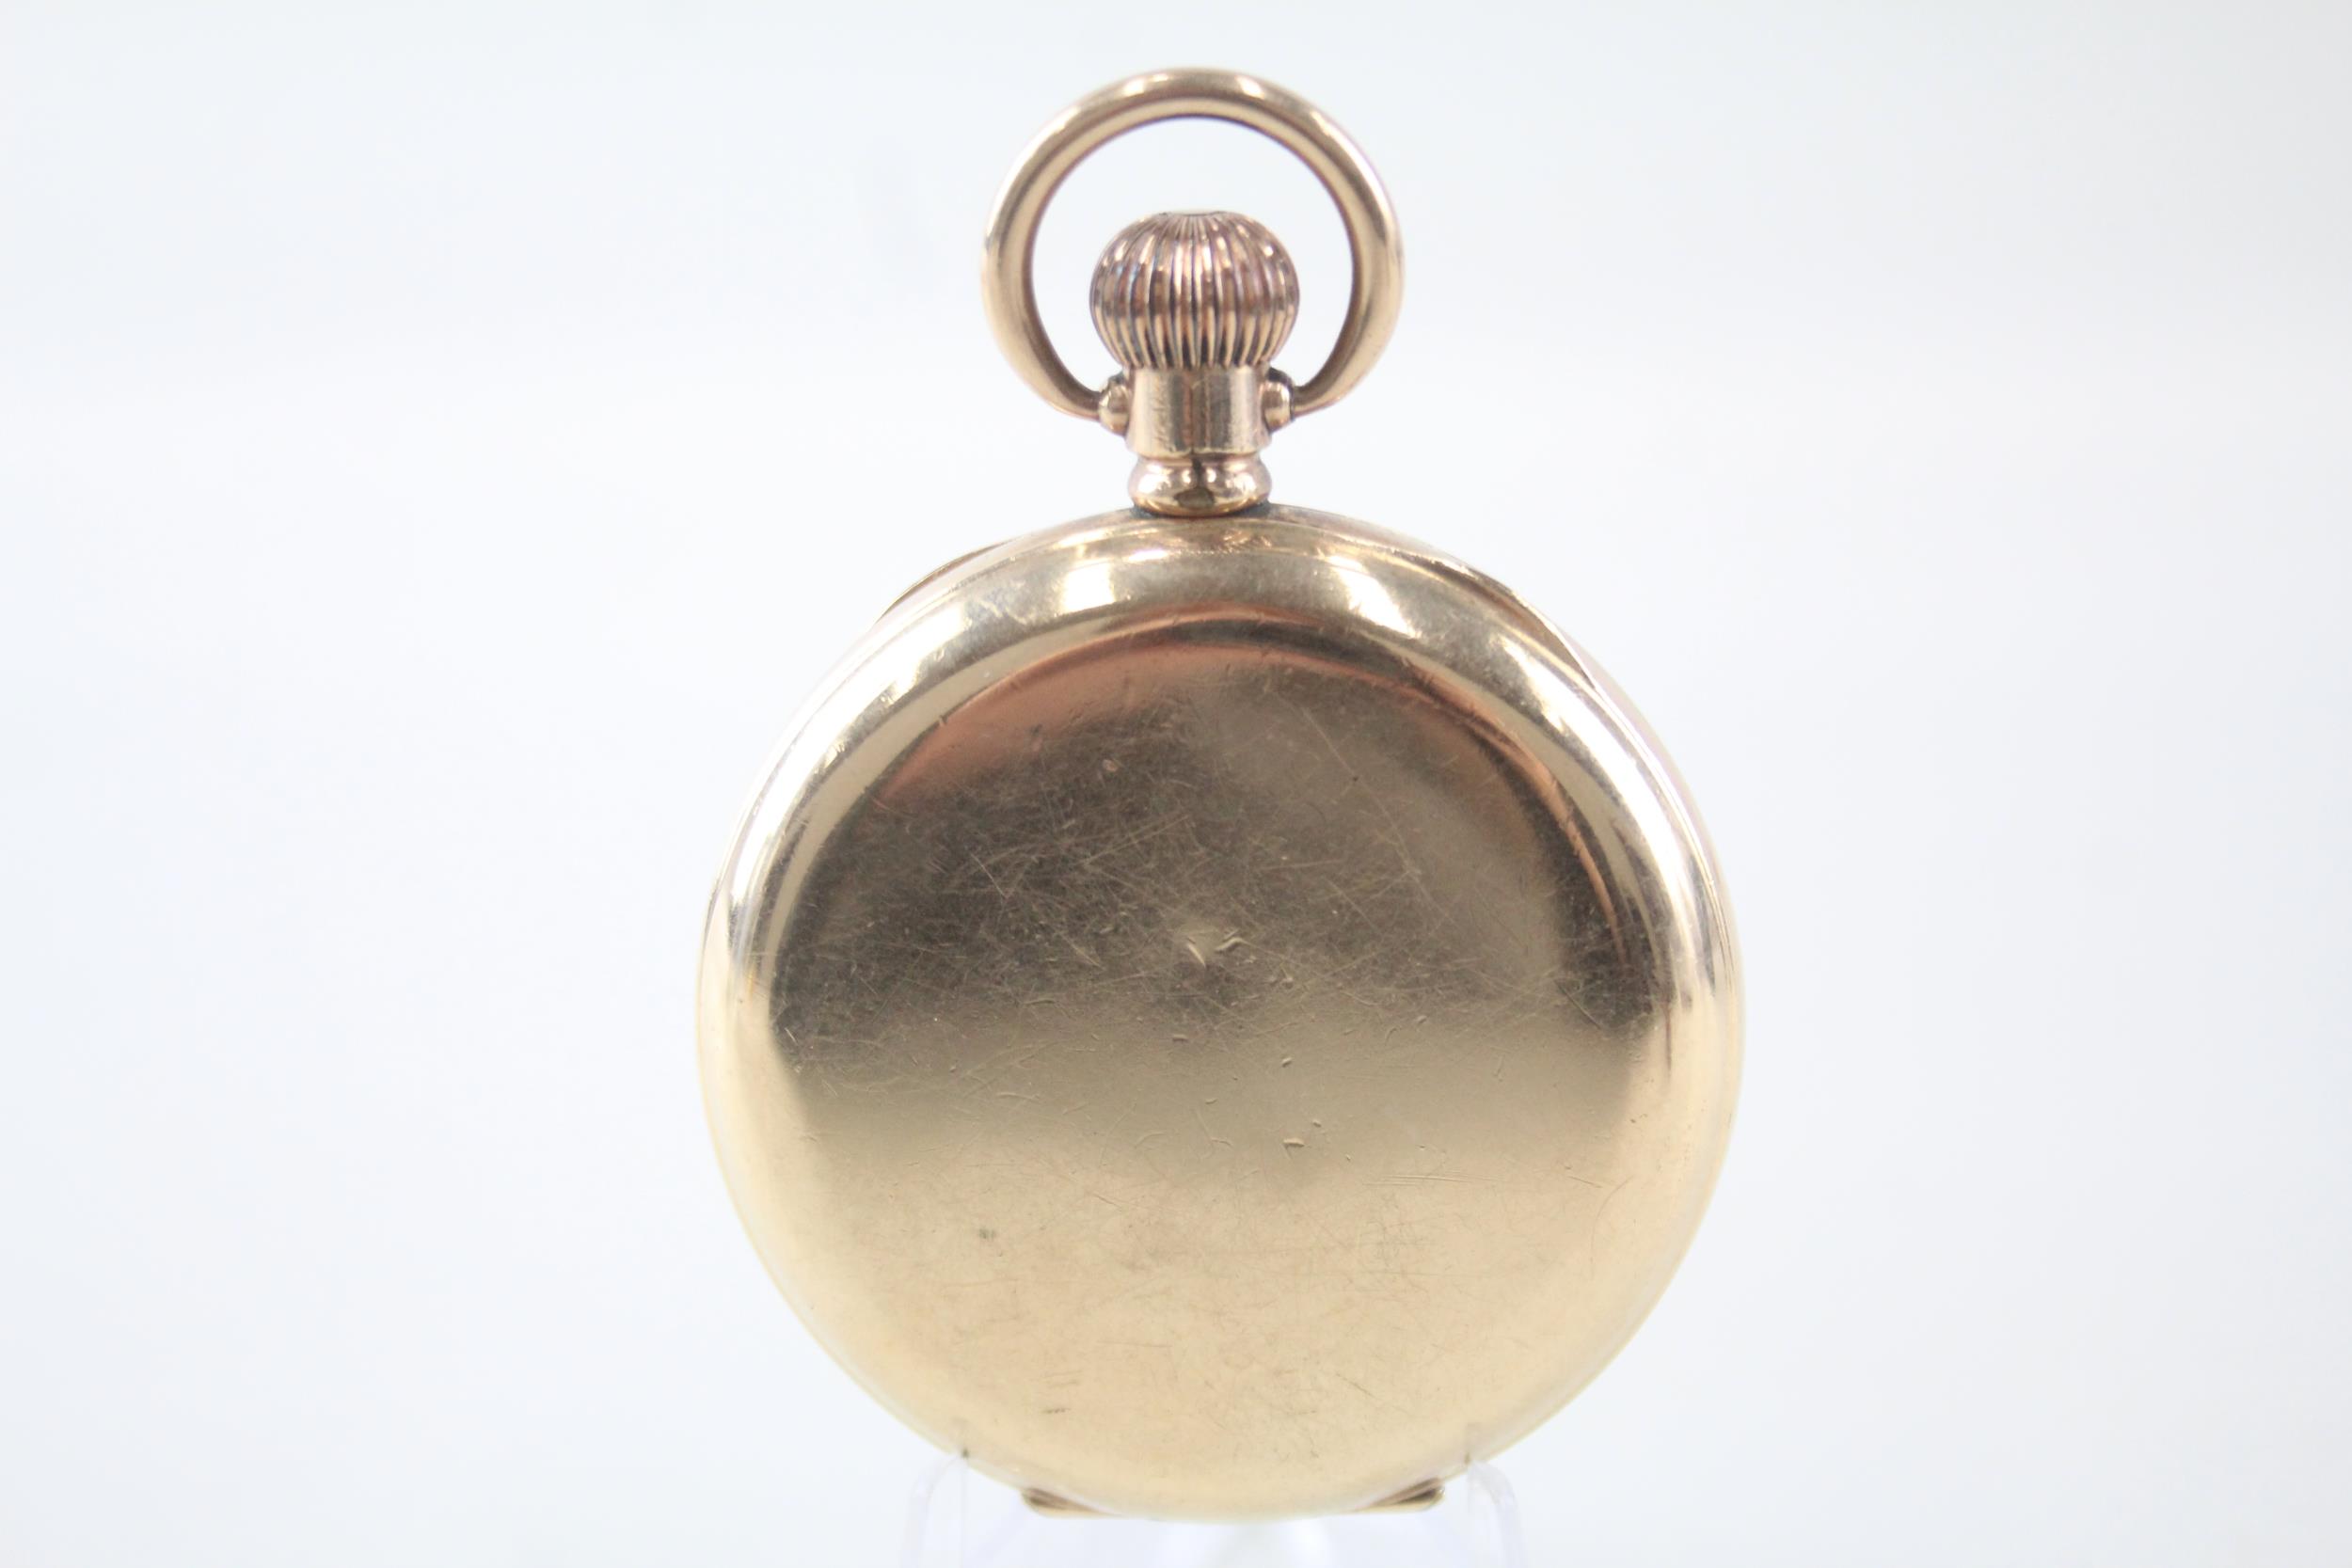 WALTHAM Gents Rolled Gold Open Face Pocket Watch Hand-wind WORKING - WALTHAM Gents Rolled Gold - Image 2 of 5